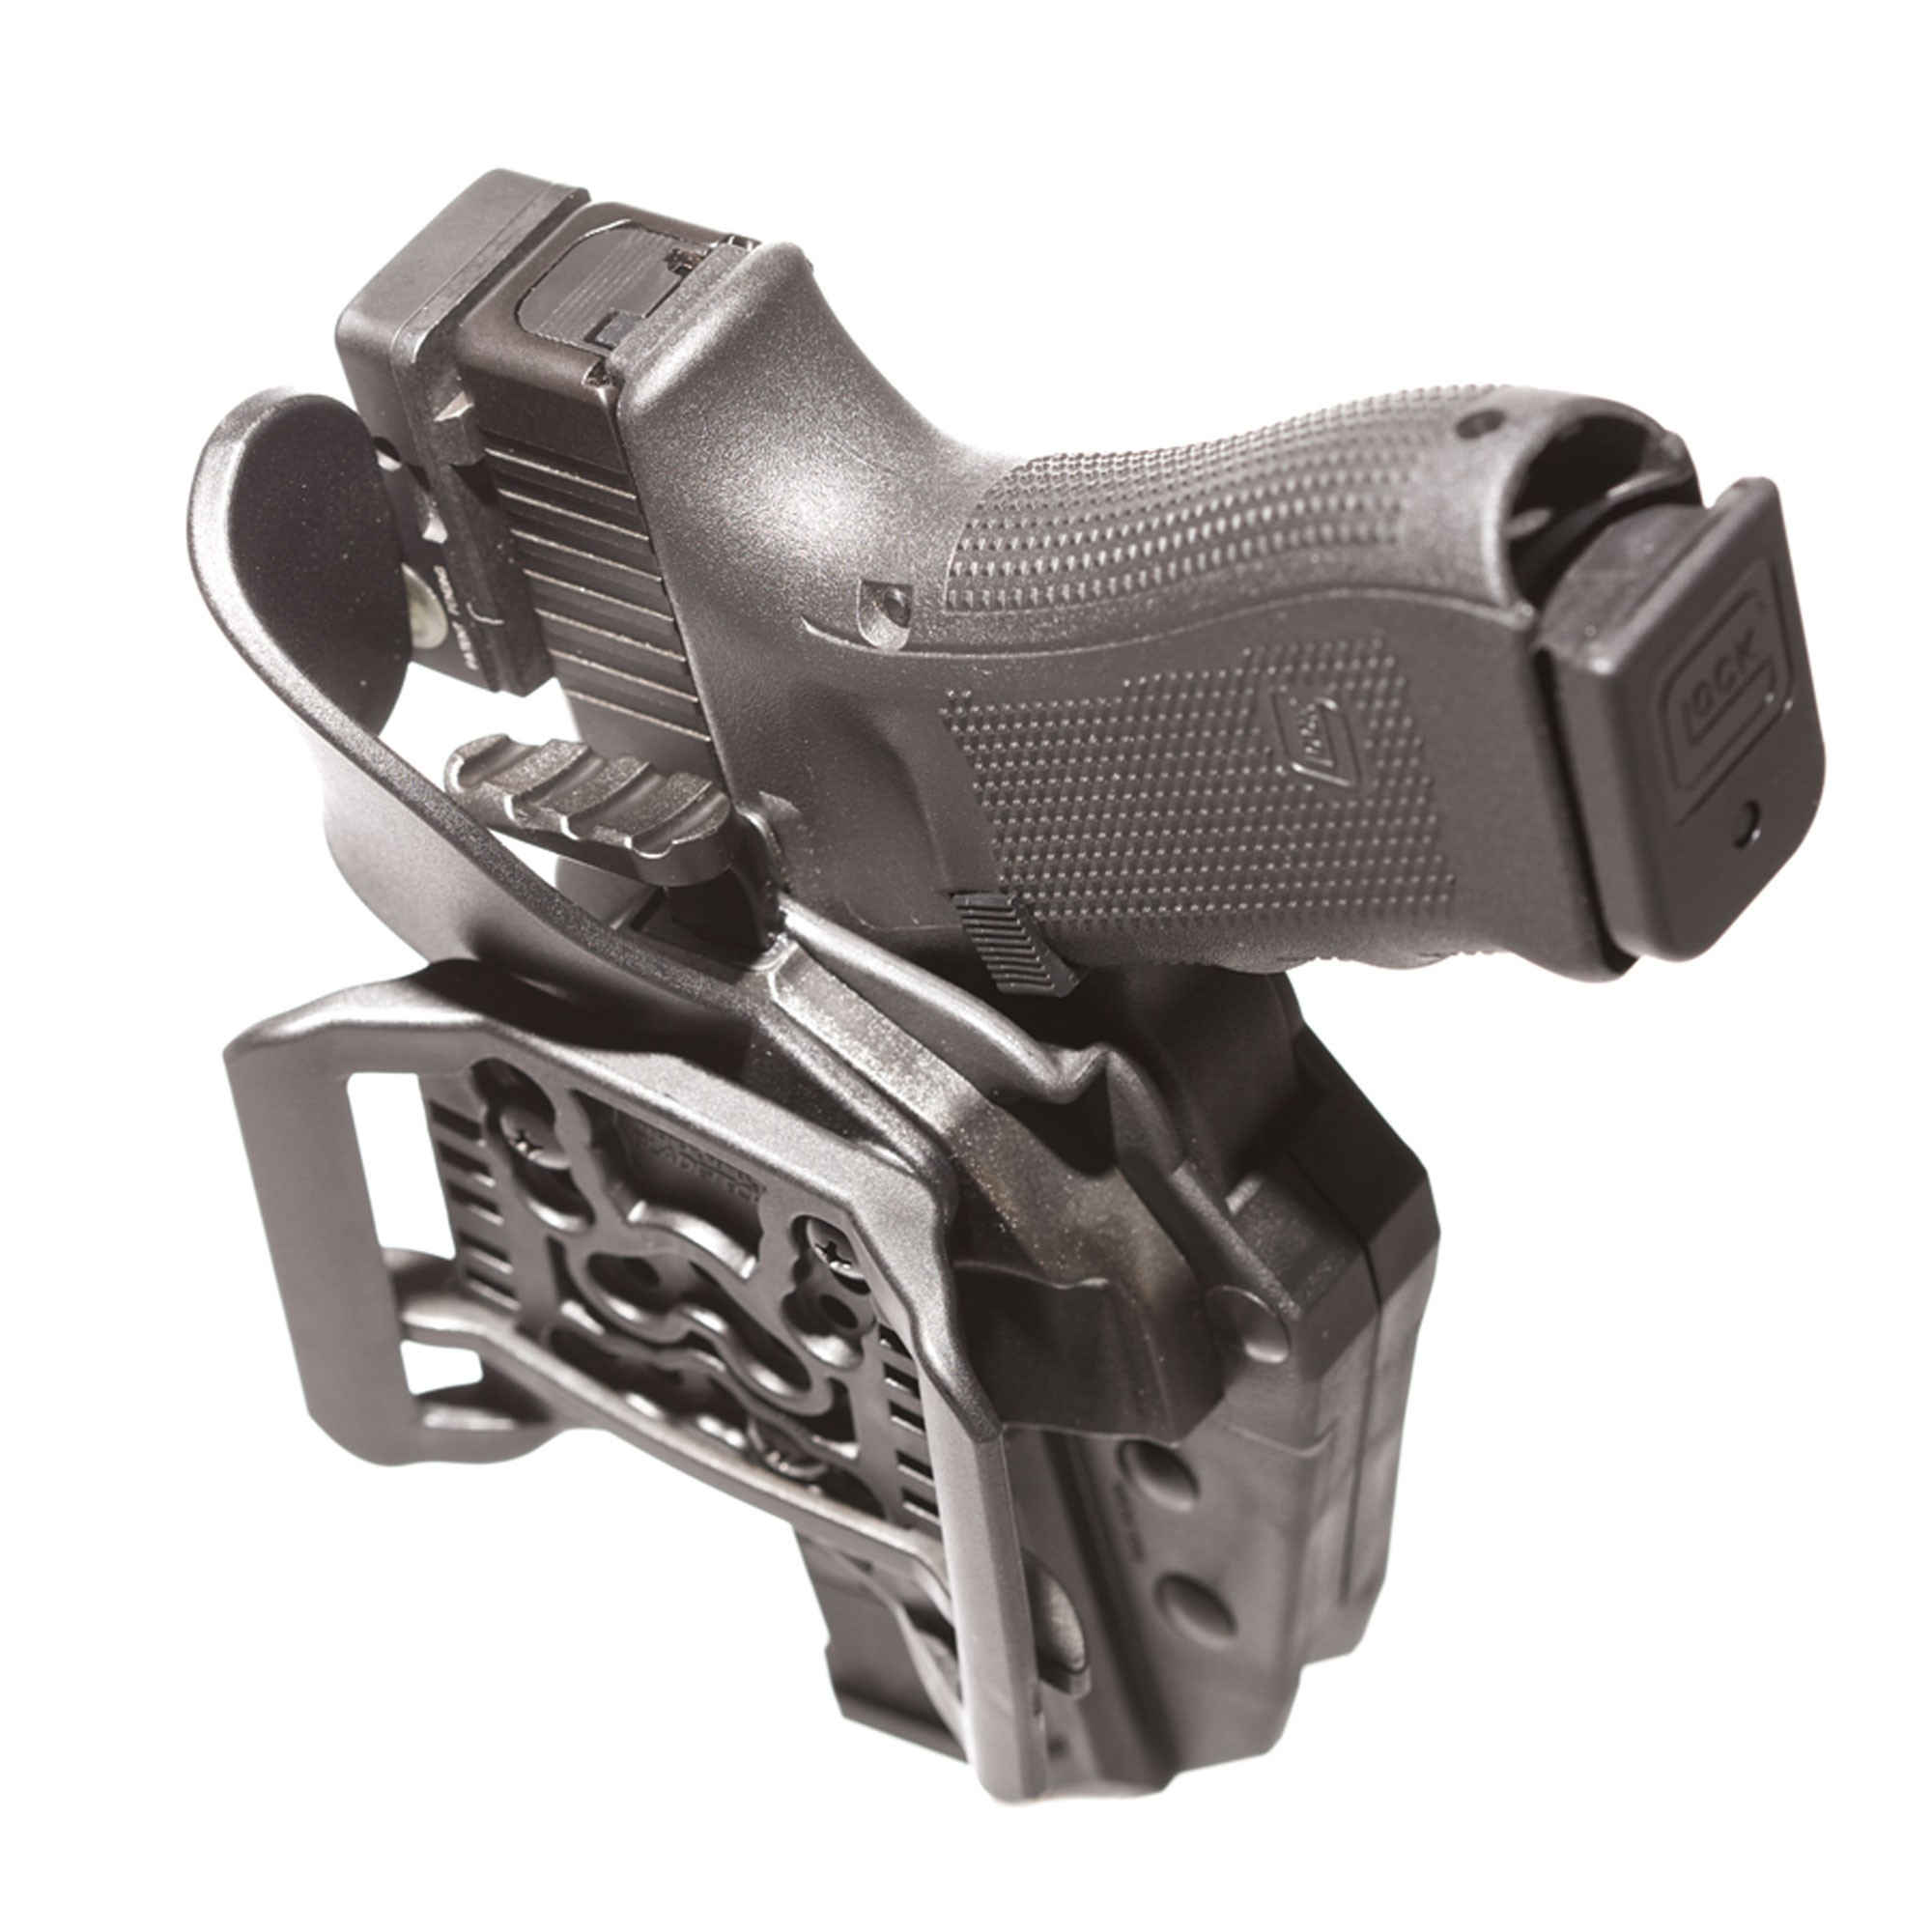 5.11 Tactical ThumDrive Holster Sig 220/226 50100